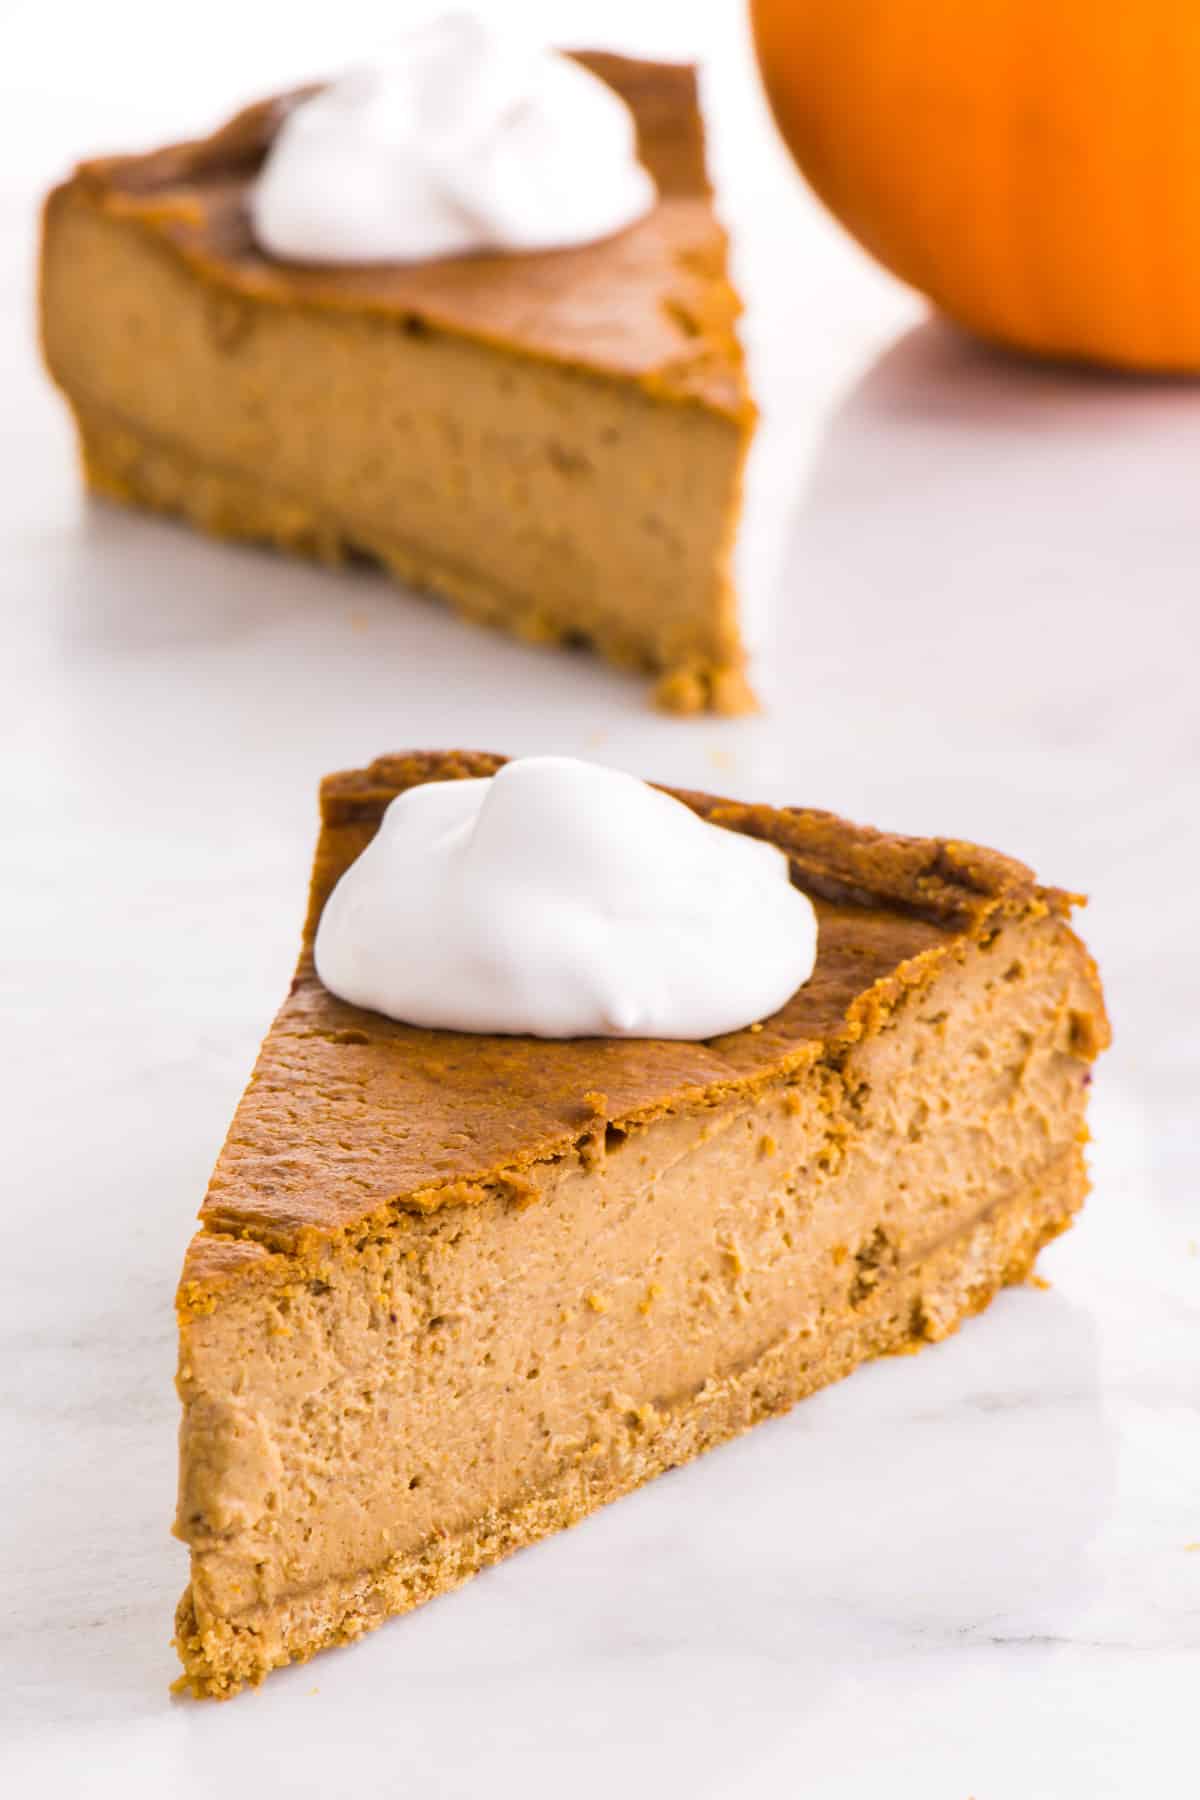 Two slices of vegan pumpkin cheesecake have whipped cream on top and sit next to  a small pumpkin.